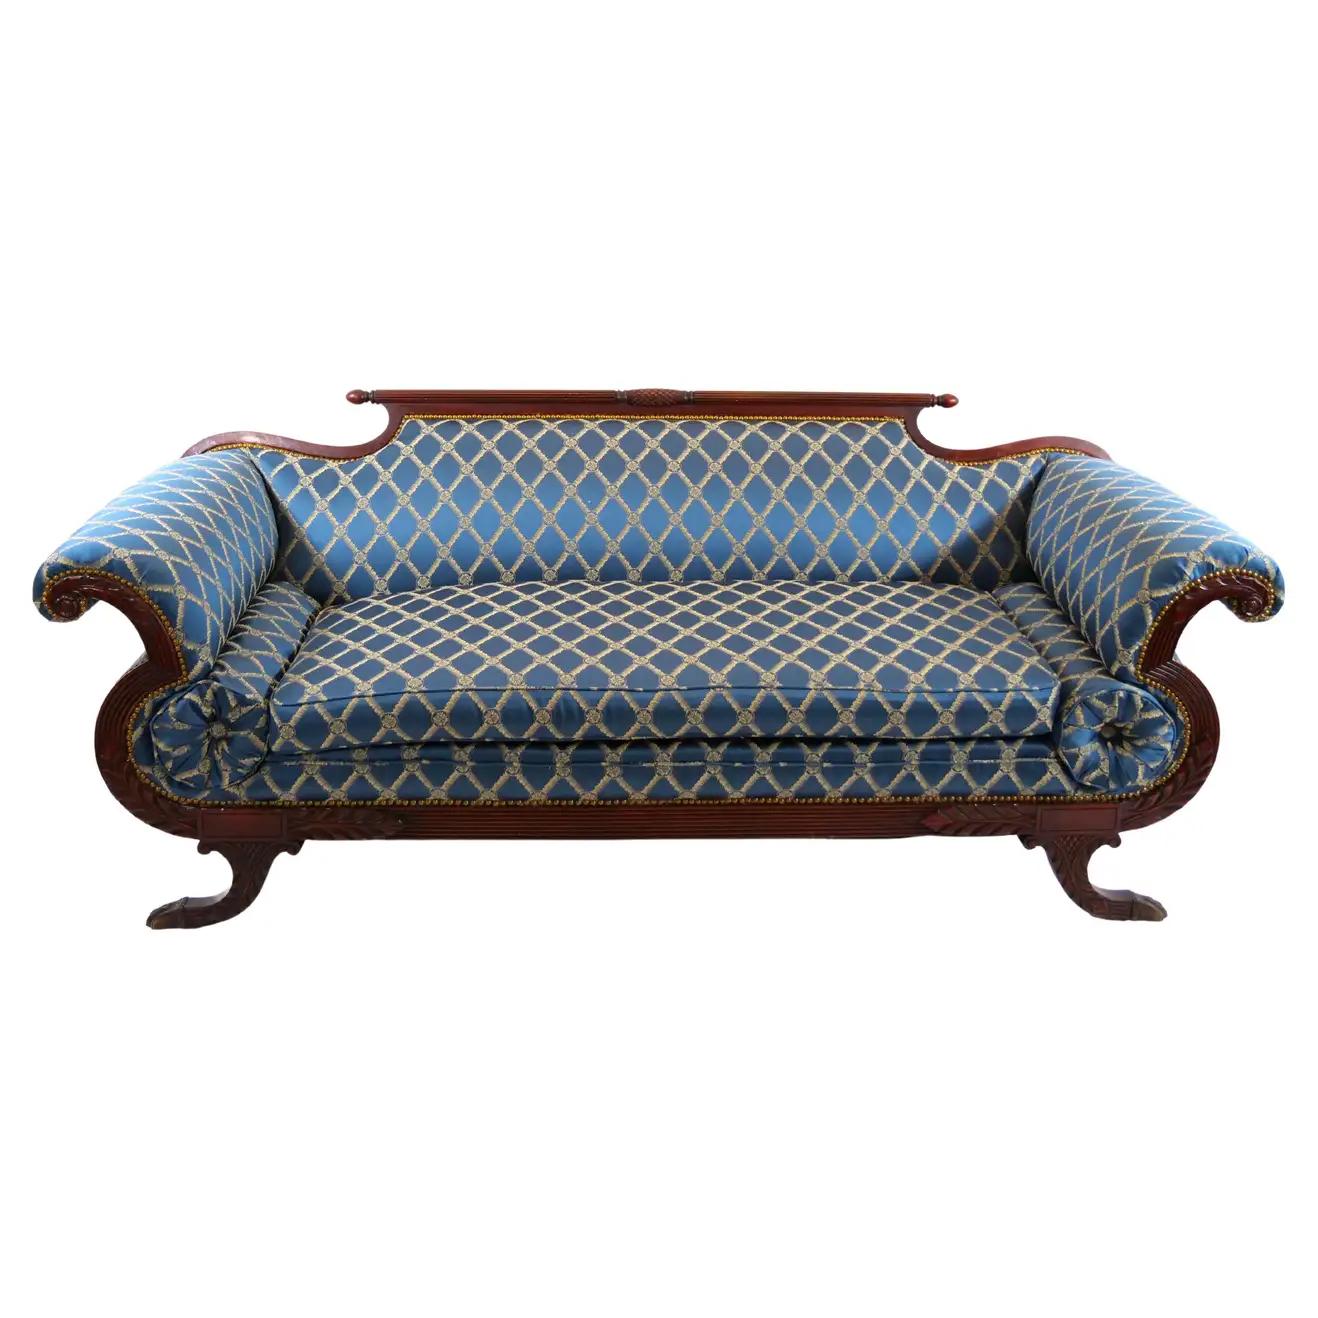 Upholstery 19th Century Empire Style Mahogany Framed Upholstered Sofa For Sale